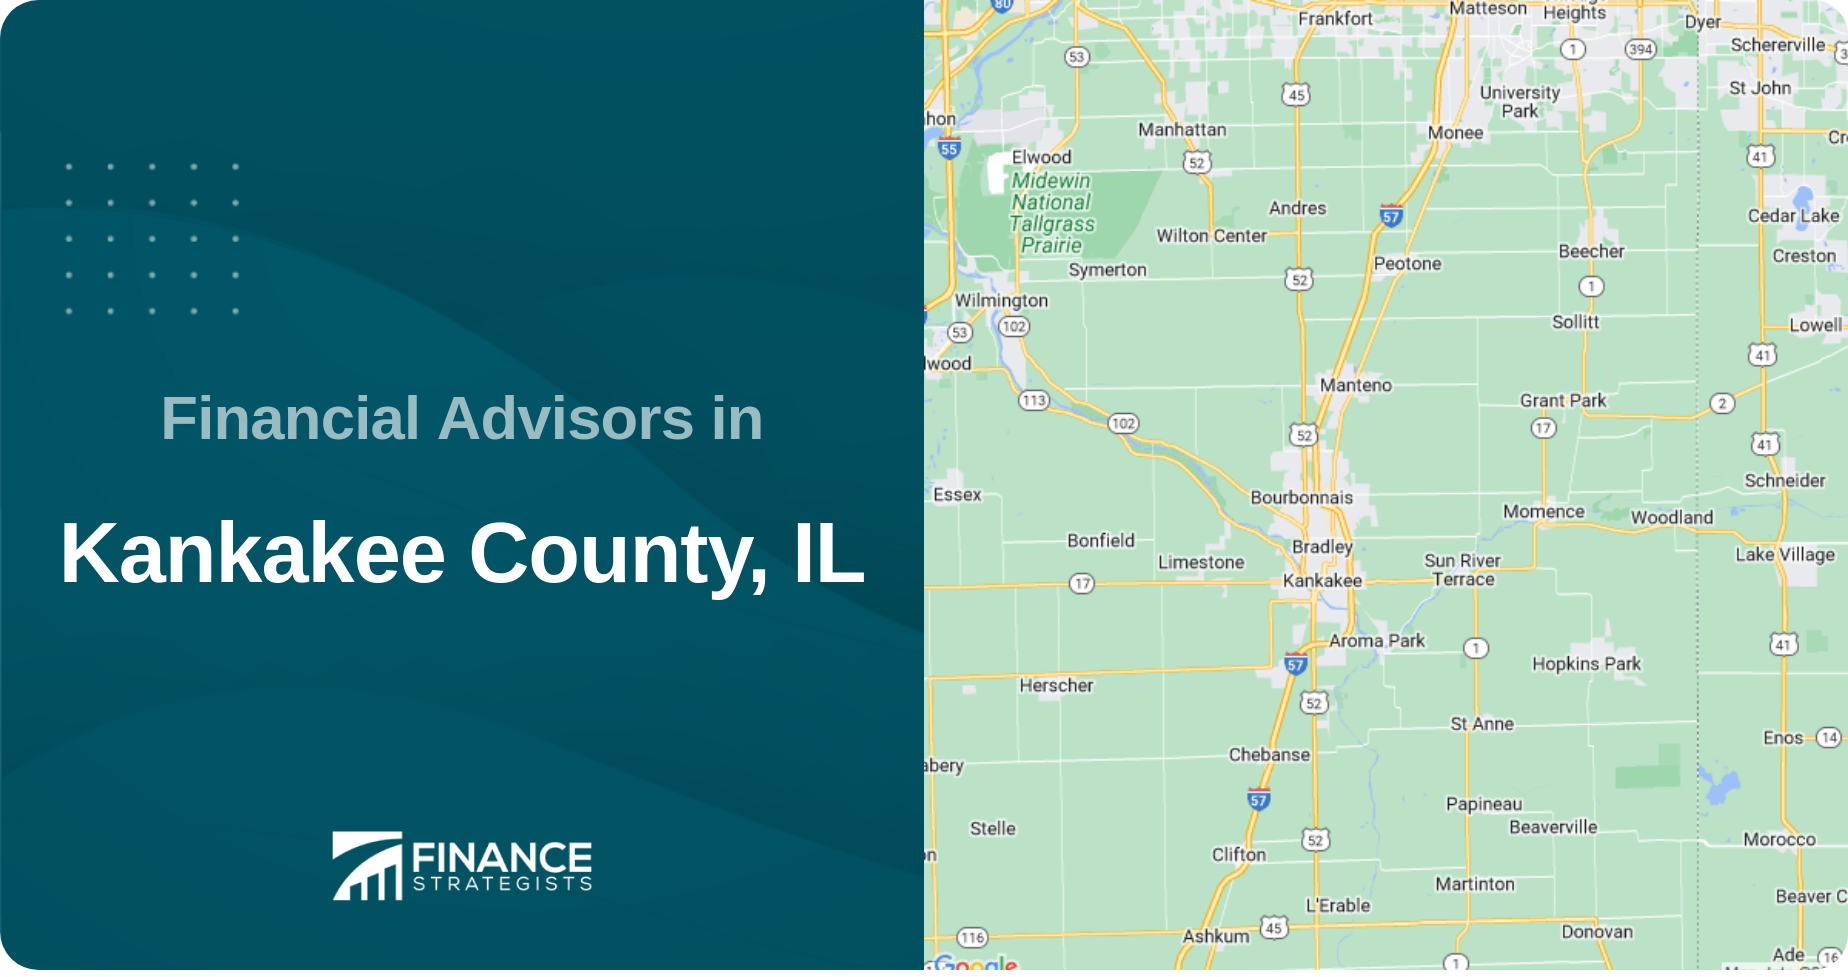 Financial Advisors in Kankakee County, IL